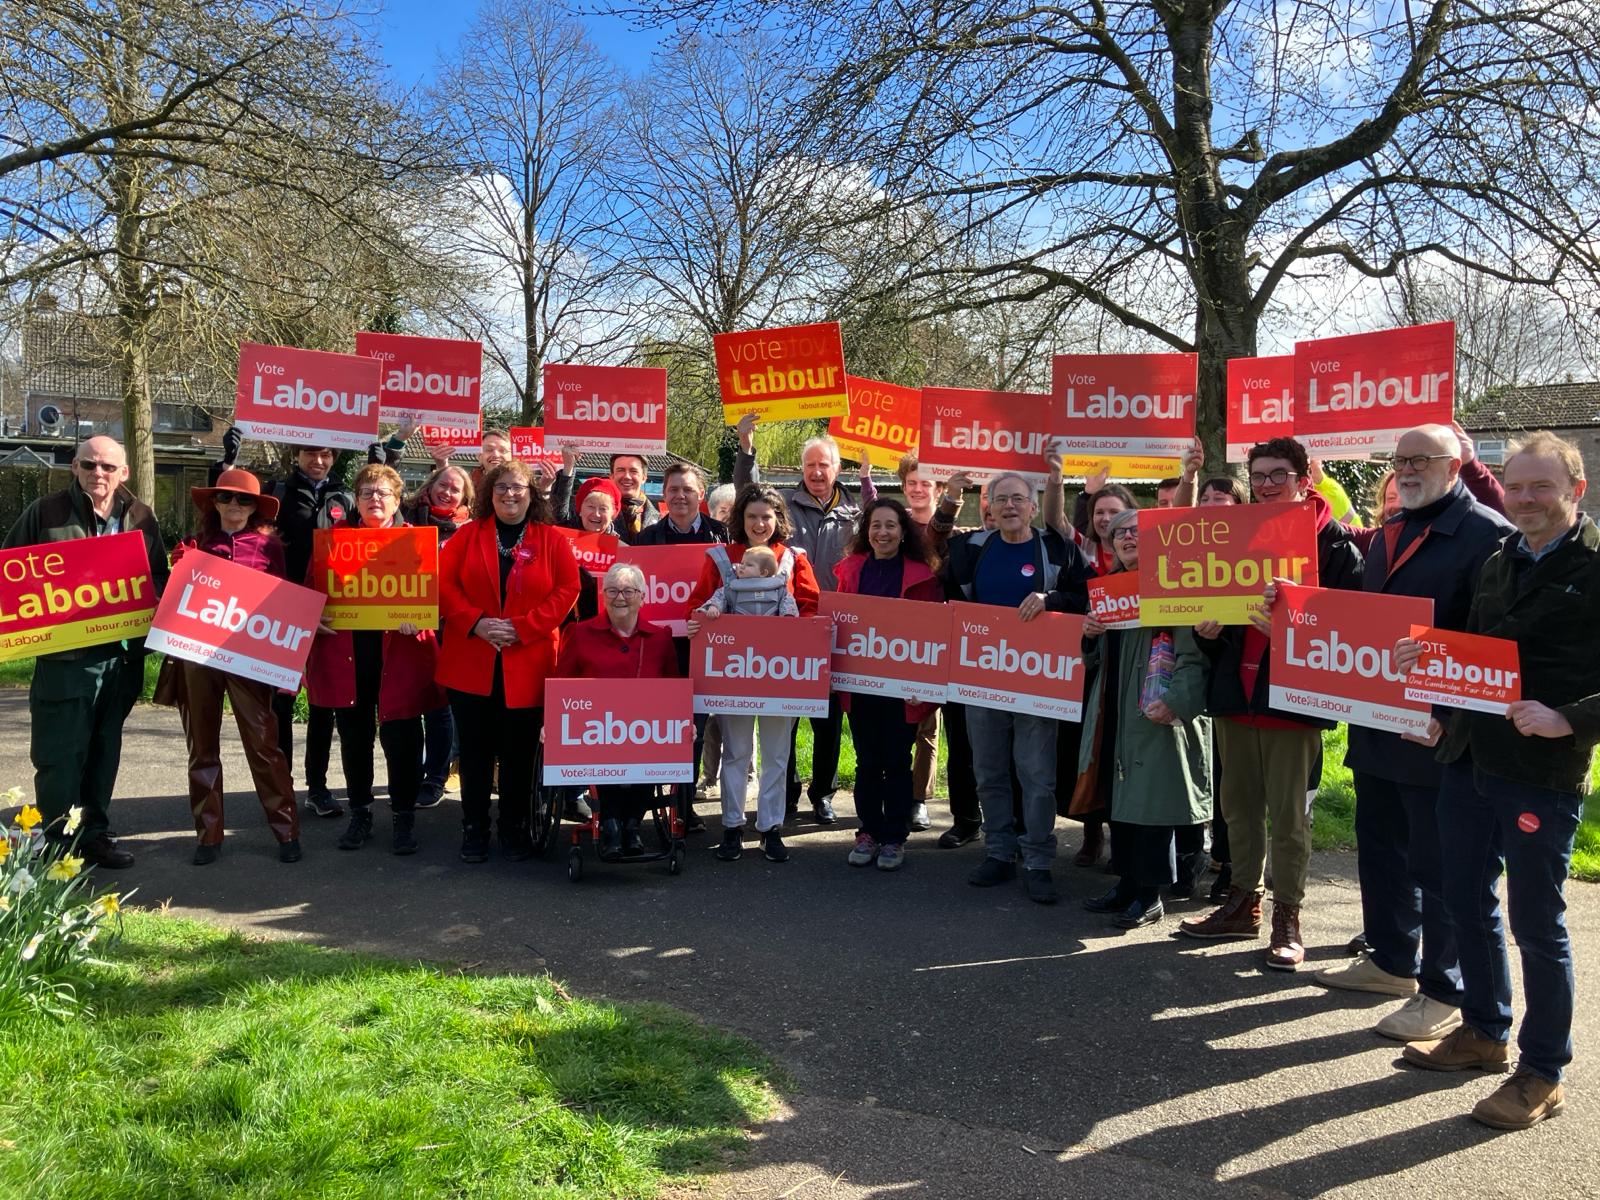 Councillors and Labour members holding Labour banners in a local park